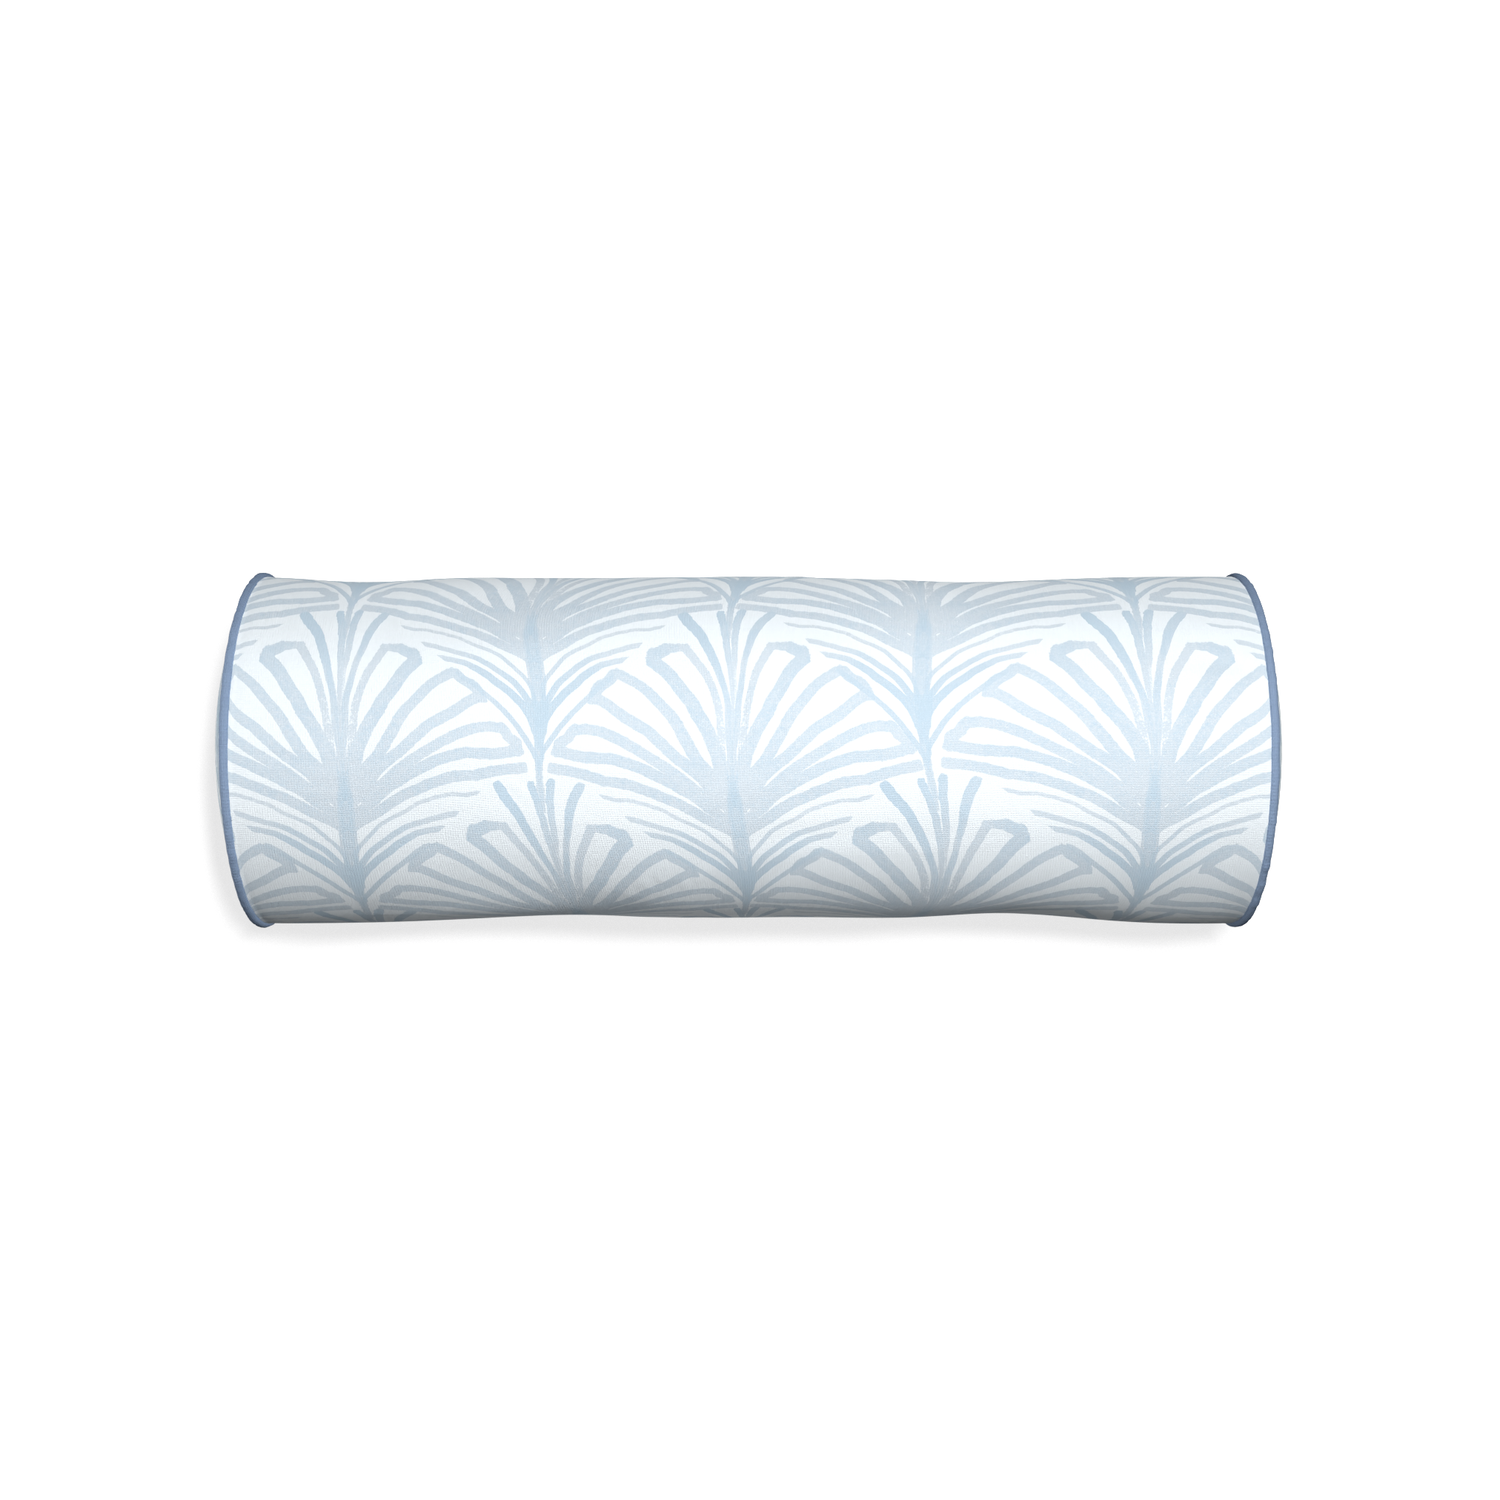 Bolster suzy sky custom pillow with sky piping on white background